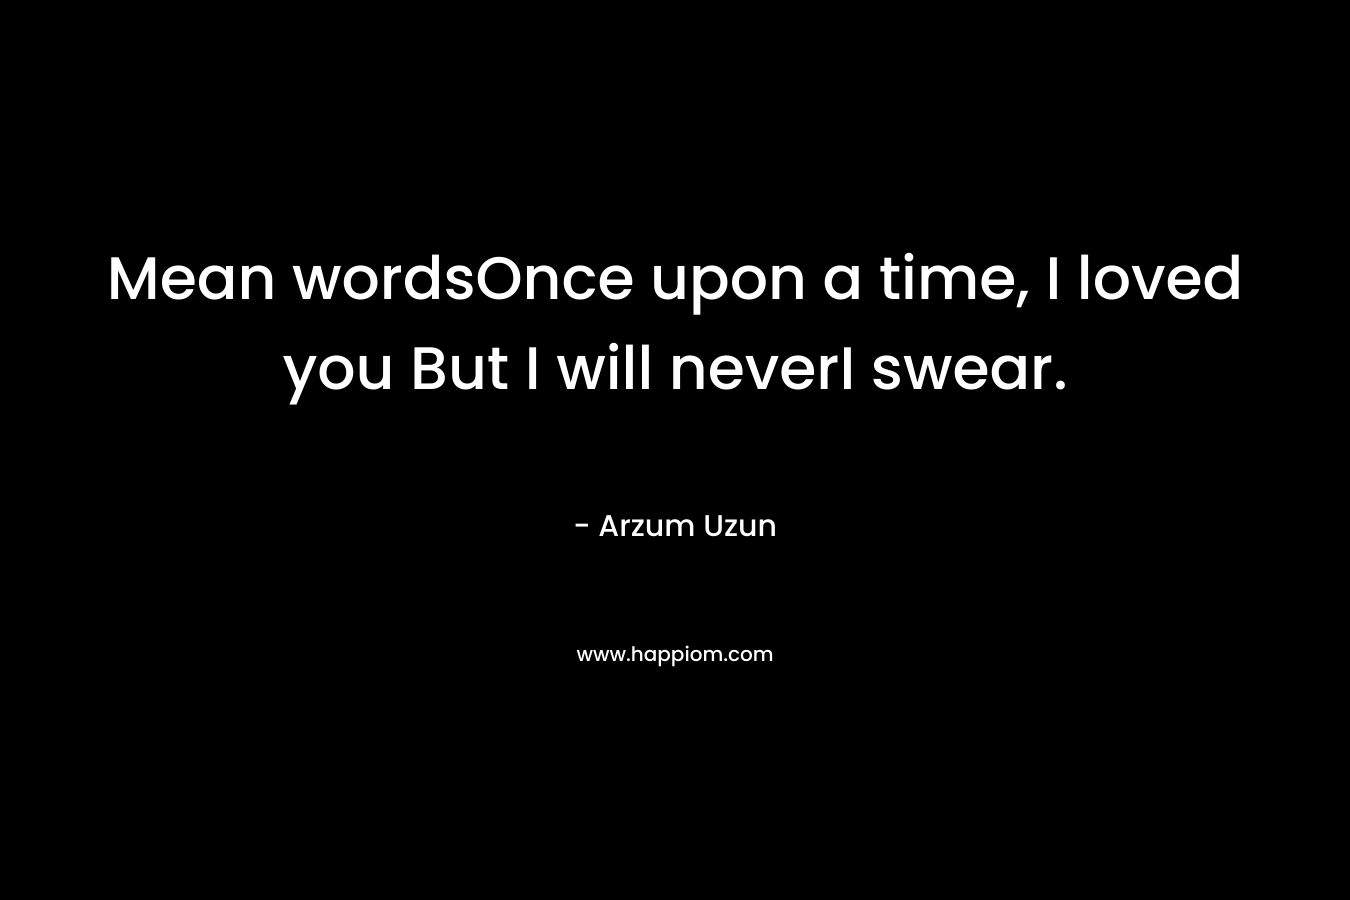 Mean wordsOnce upon a time, I loved you But I will neverI swear. – Arzum Uzun